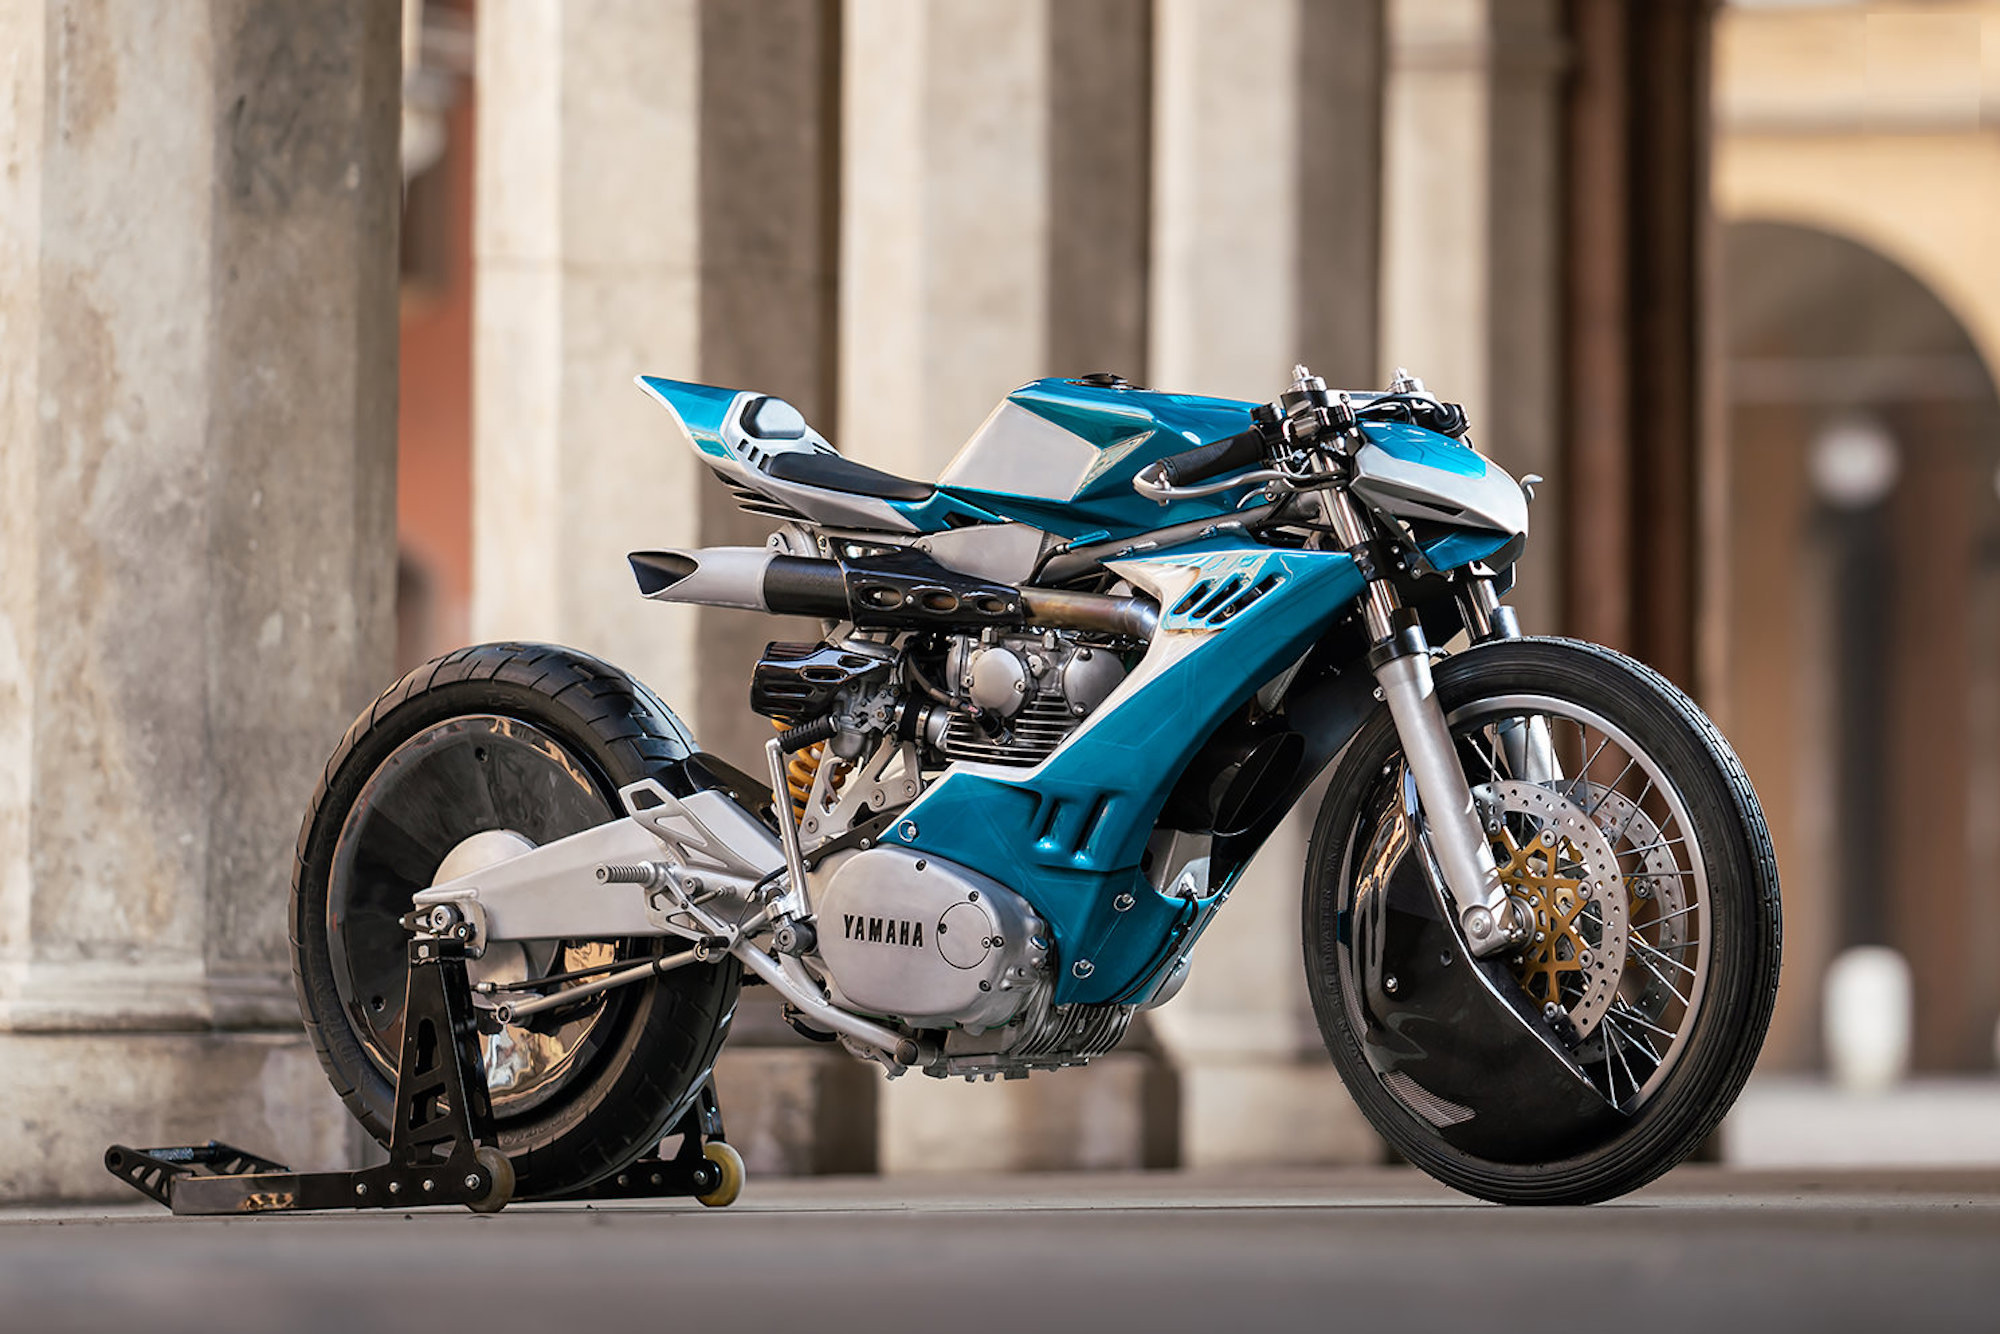 A Yamaha XS650 retro racer from the mind of Simone Conti. Media sourced from BikeEXIF.